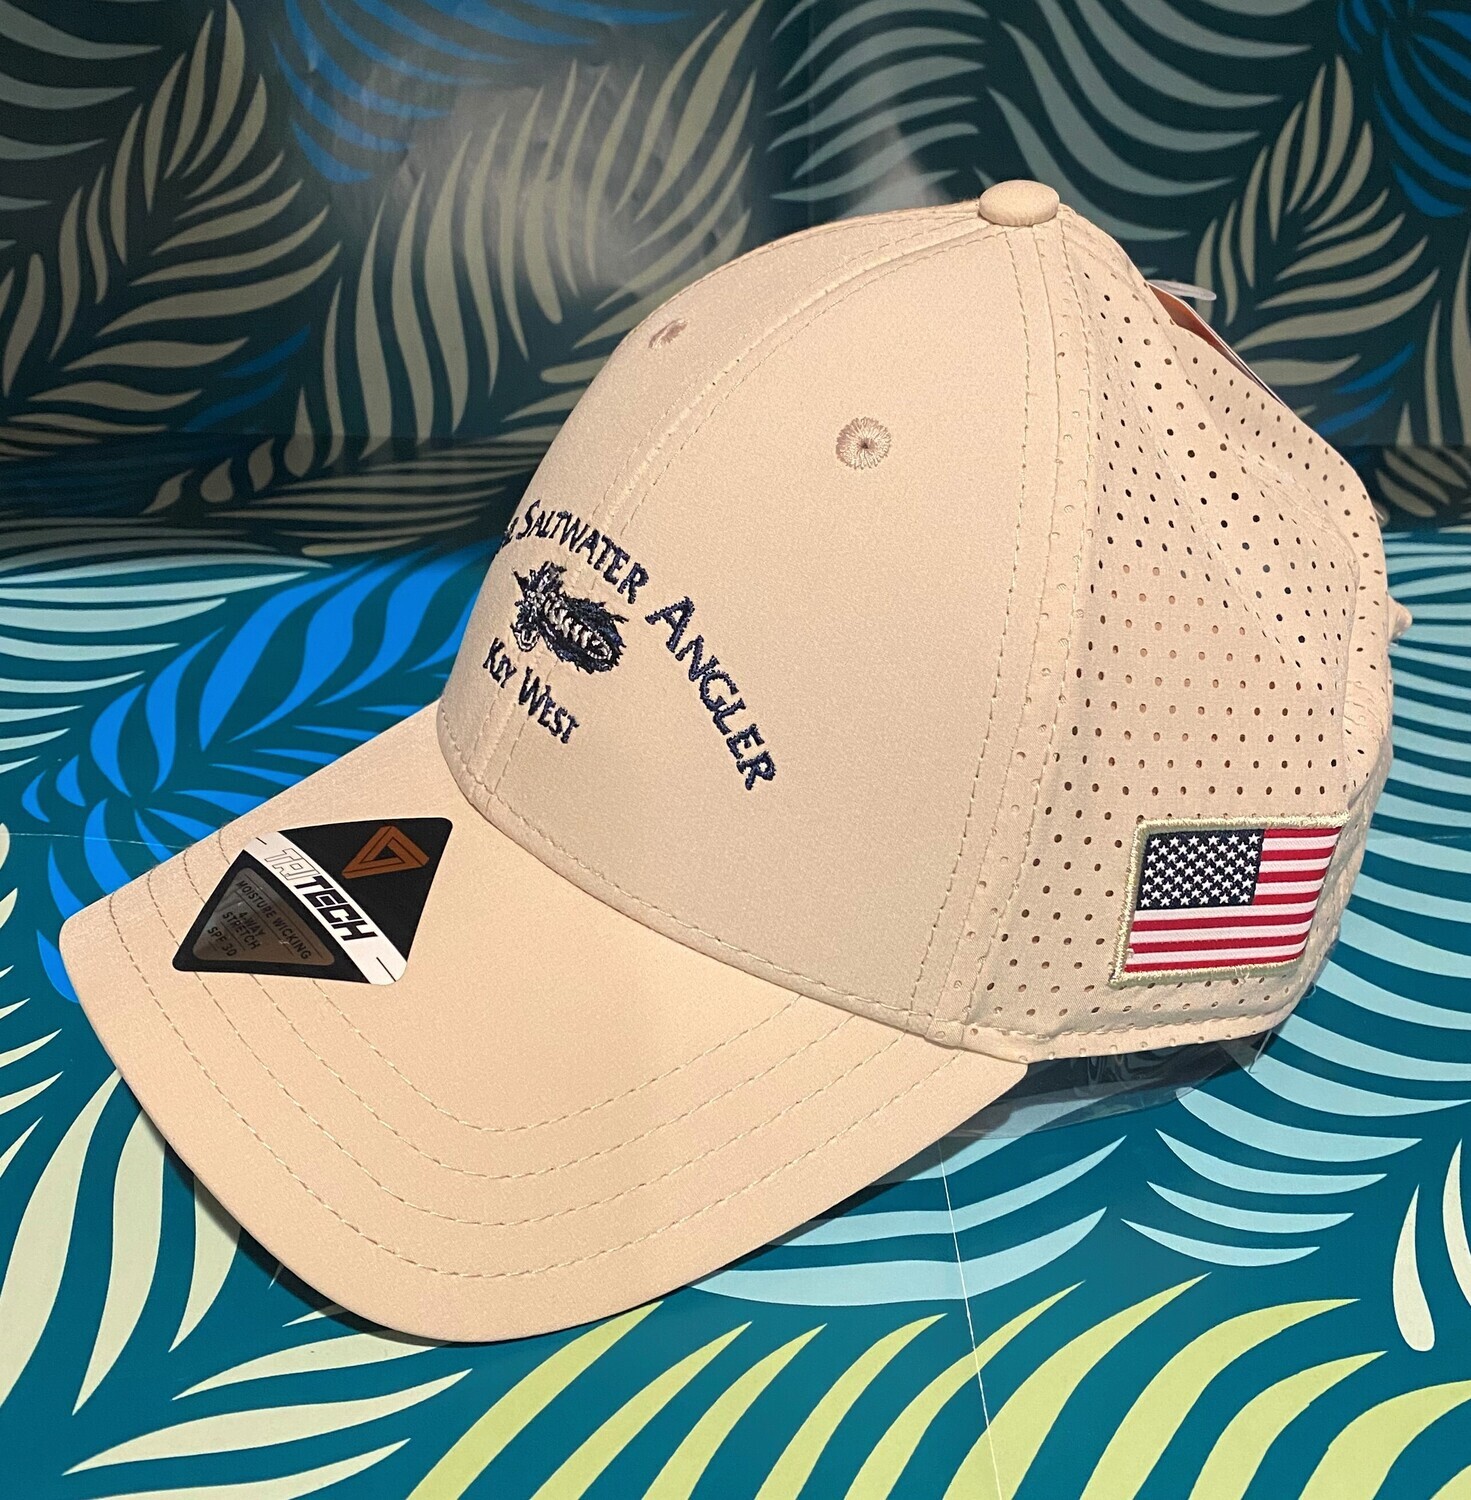 Saltwater Angler Tri-Tech Perforated Hat